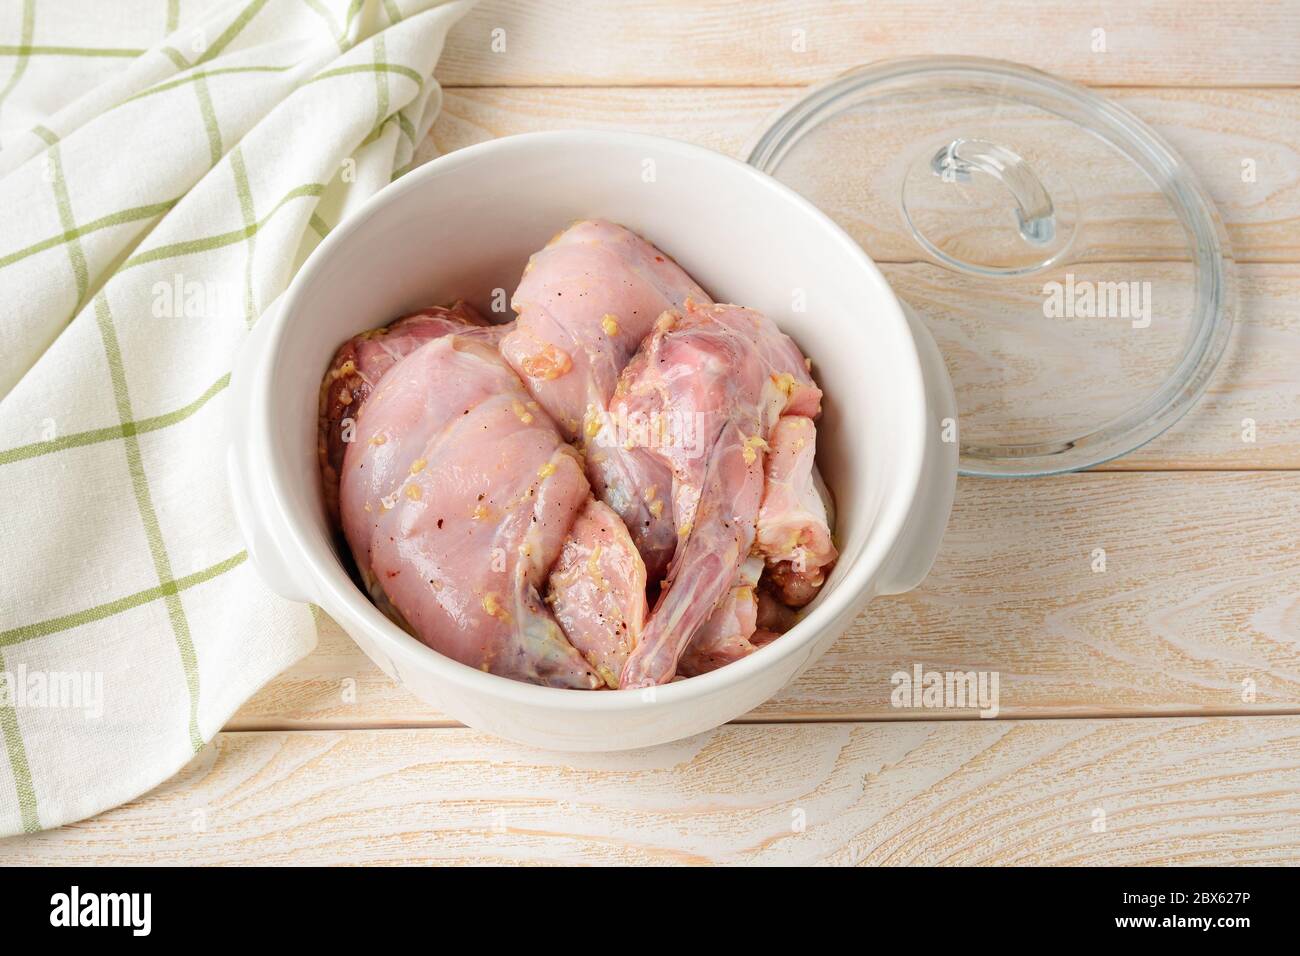 Pieces of fresh raw rabbit meat marinated with olive oil and garlic before stewing in a white ceramic pan on the kitchen table. Cooking rabbit stew. Stock Photo